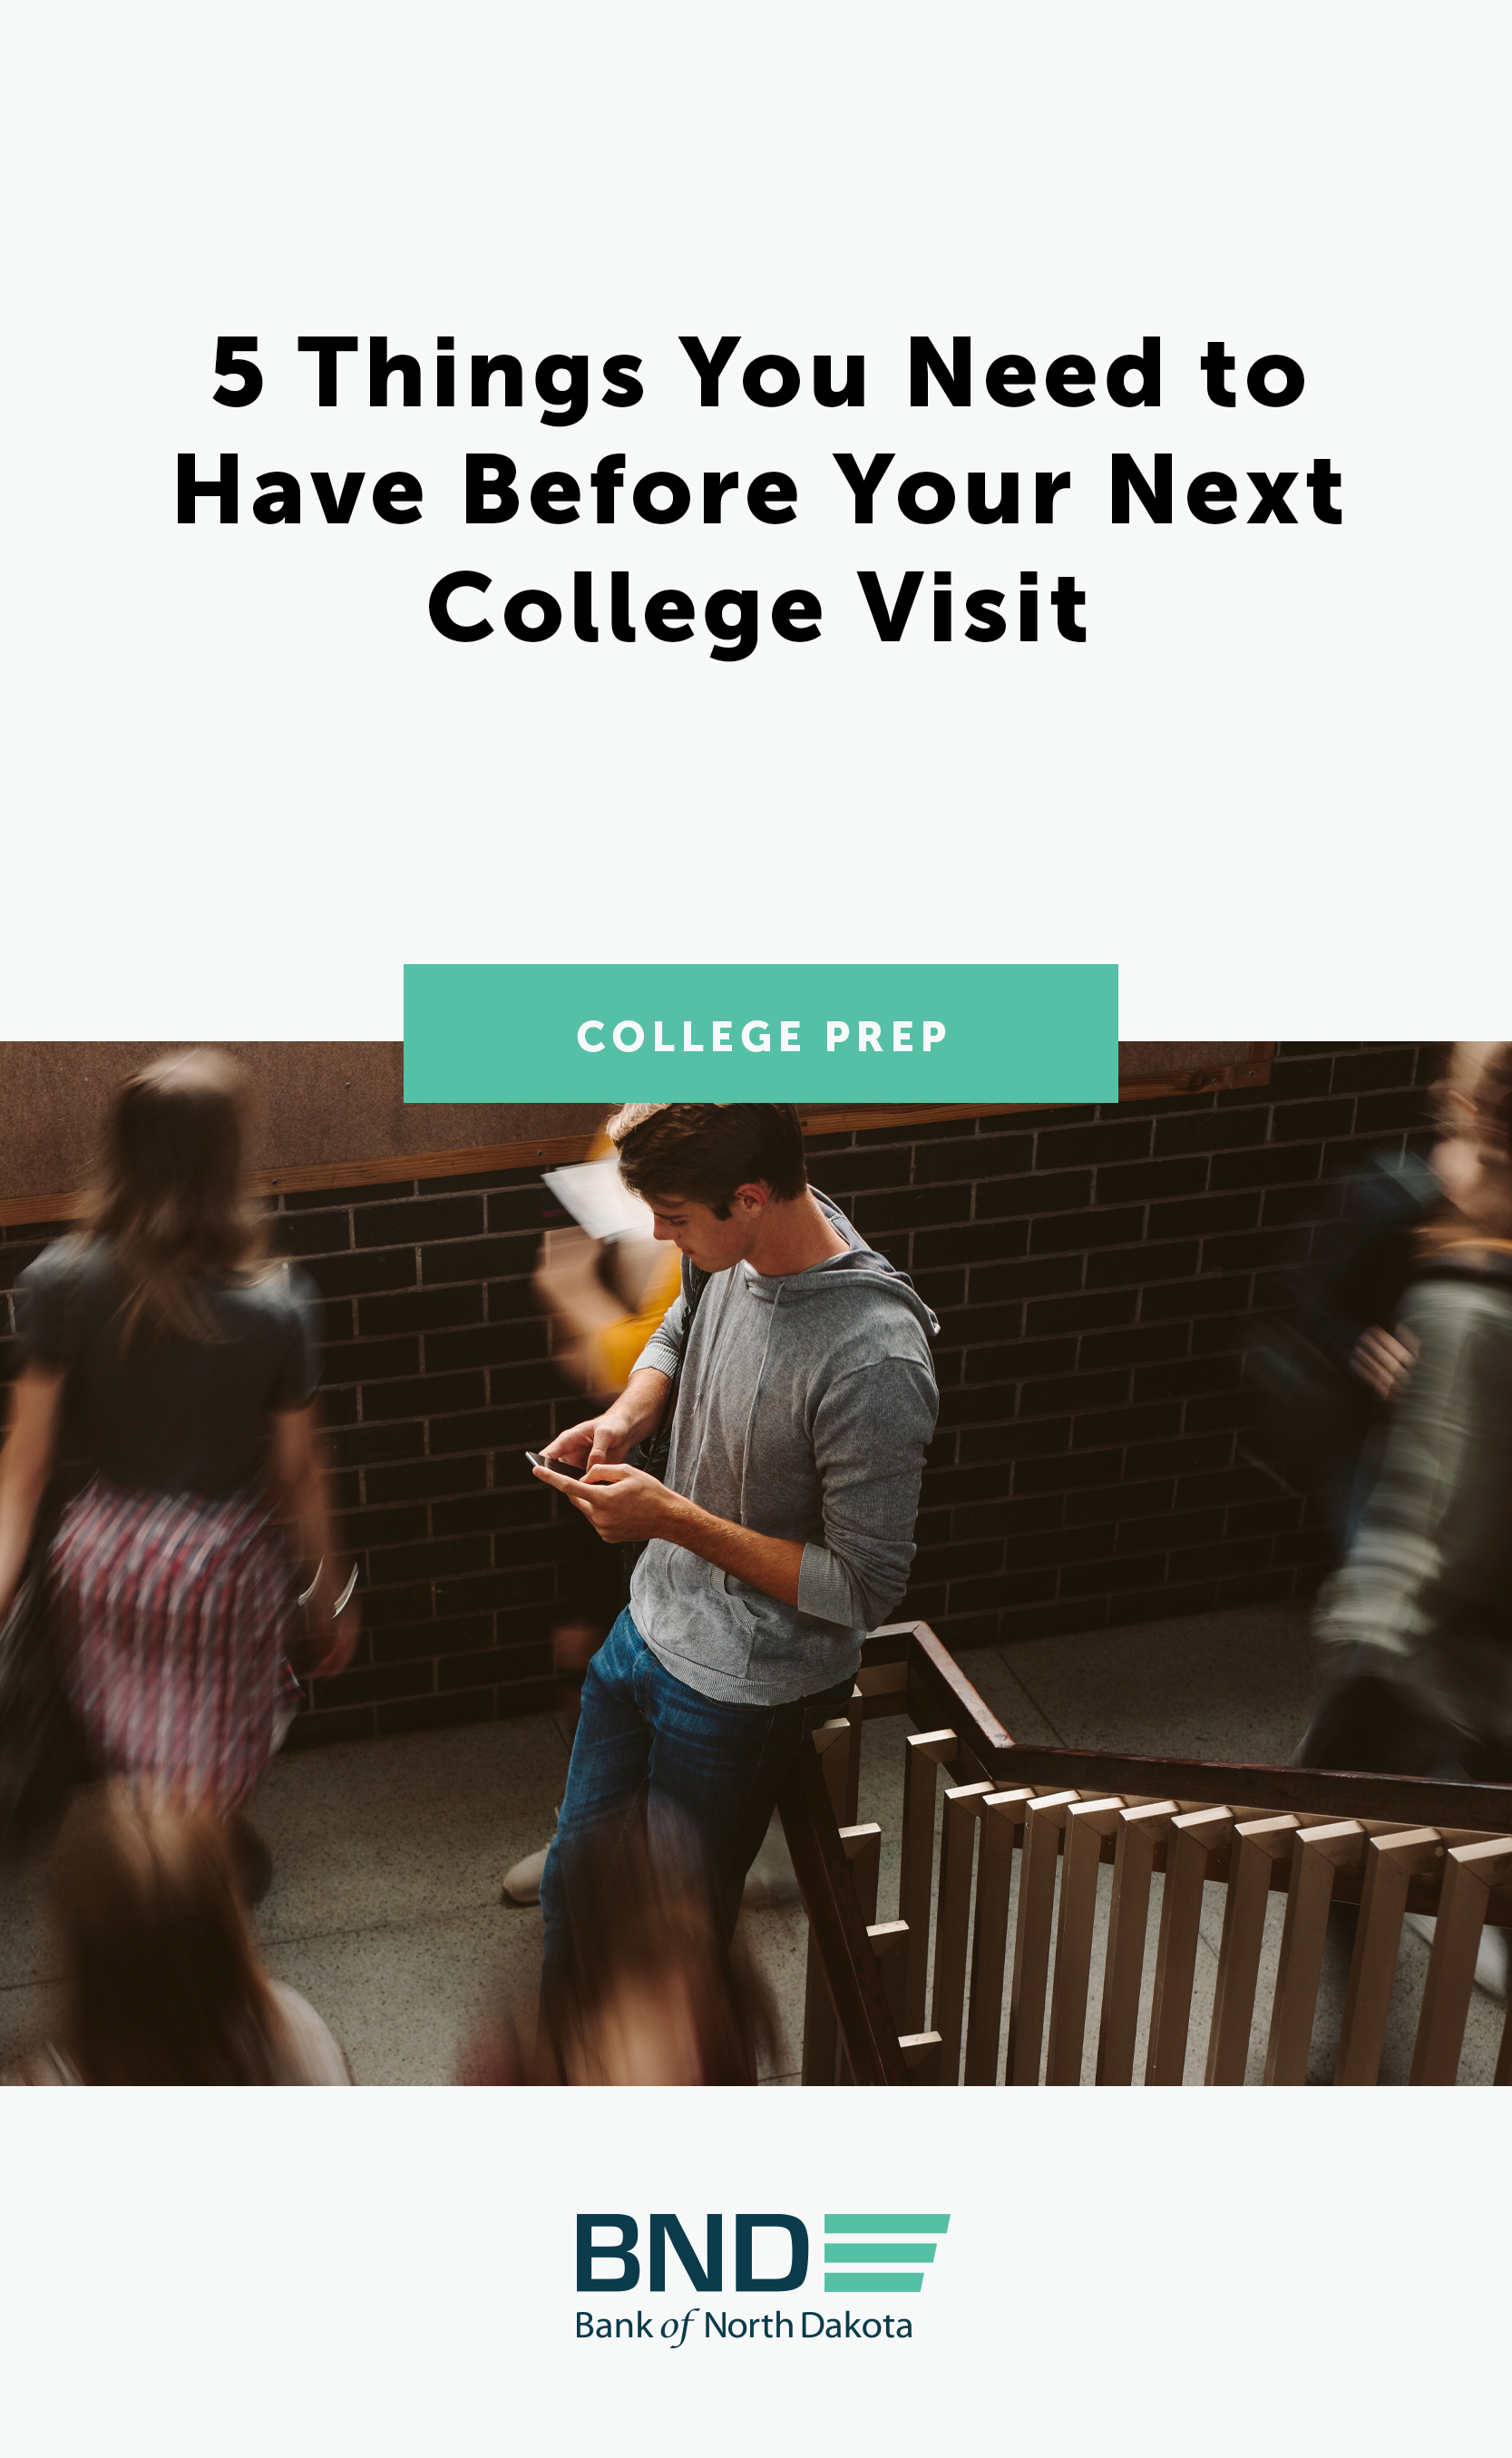 5-Things-You-Need-For-A-College-Visit